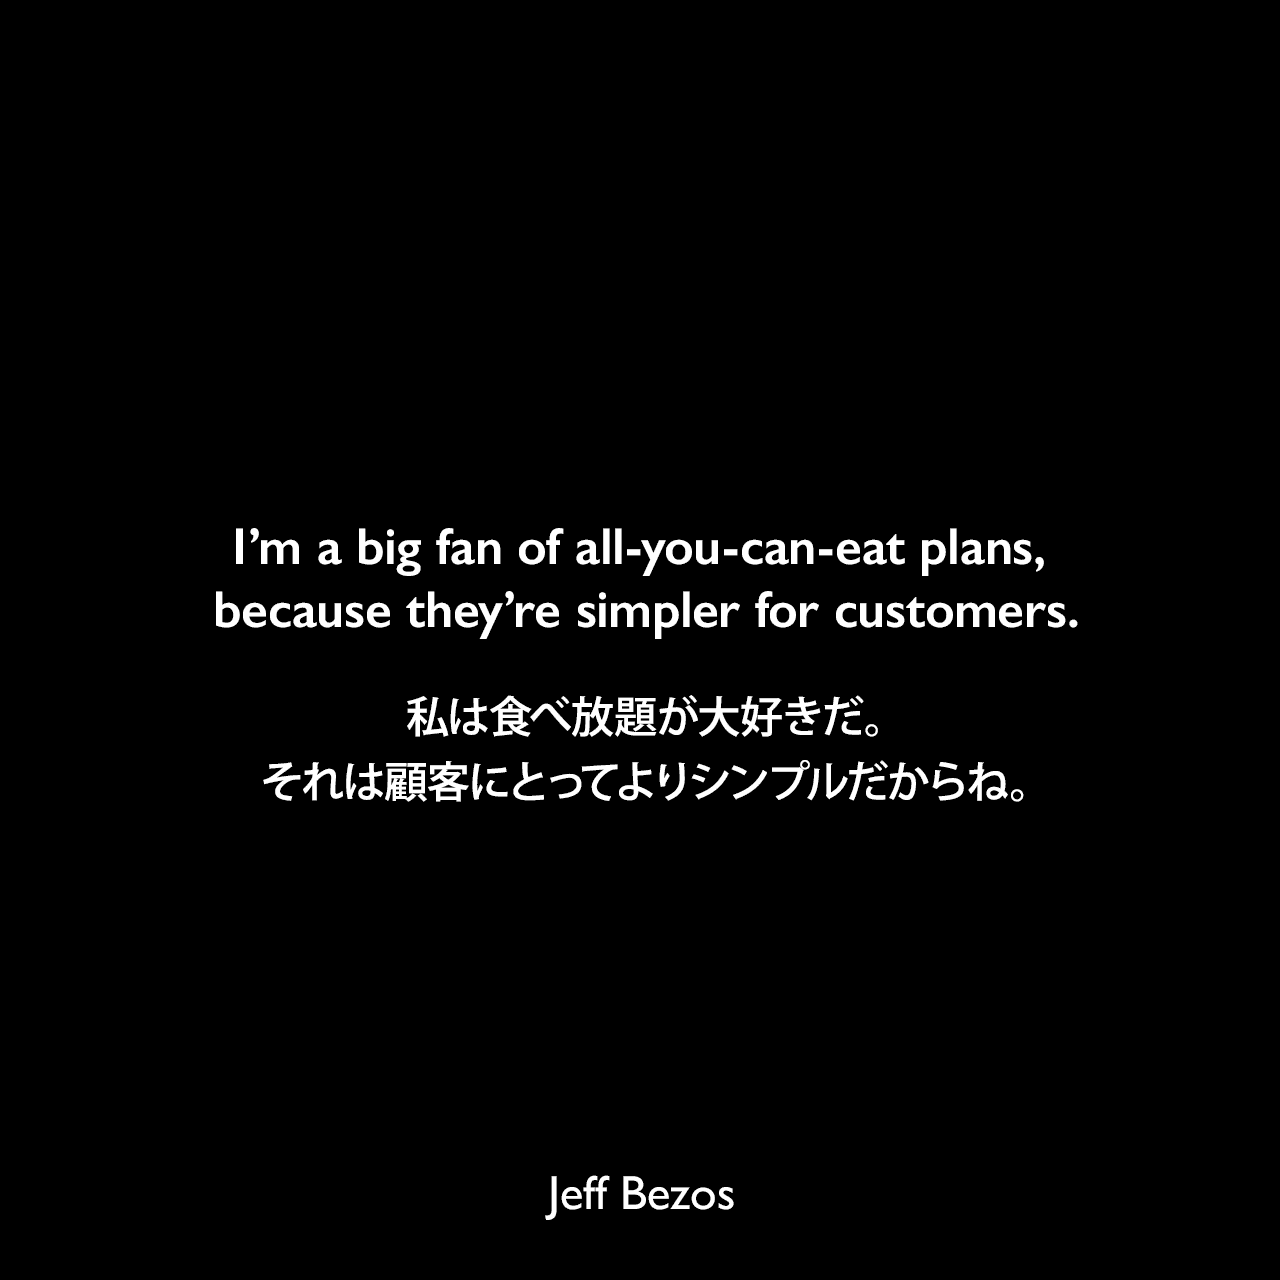 I’m a big fan of all-you-can-eat plans, because they’re simpler for customers.私は食べ放題が大好きだ。それは顧客にとってよりシンプルだからね。Jeff Bezos